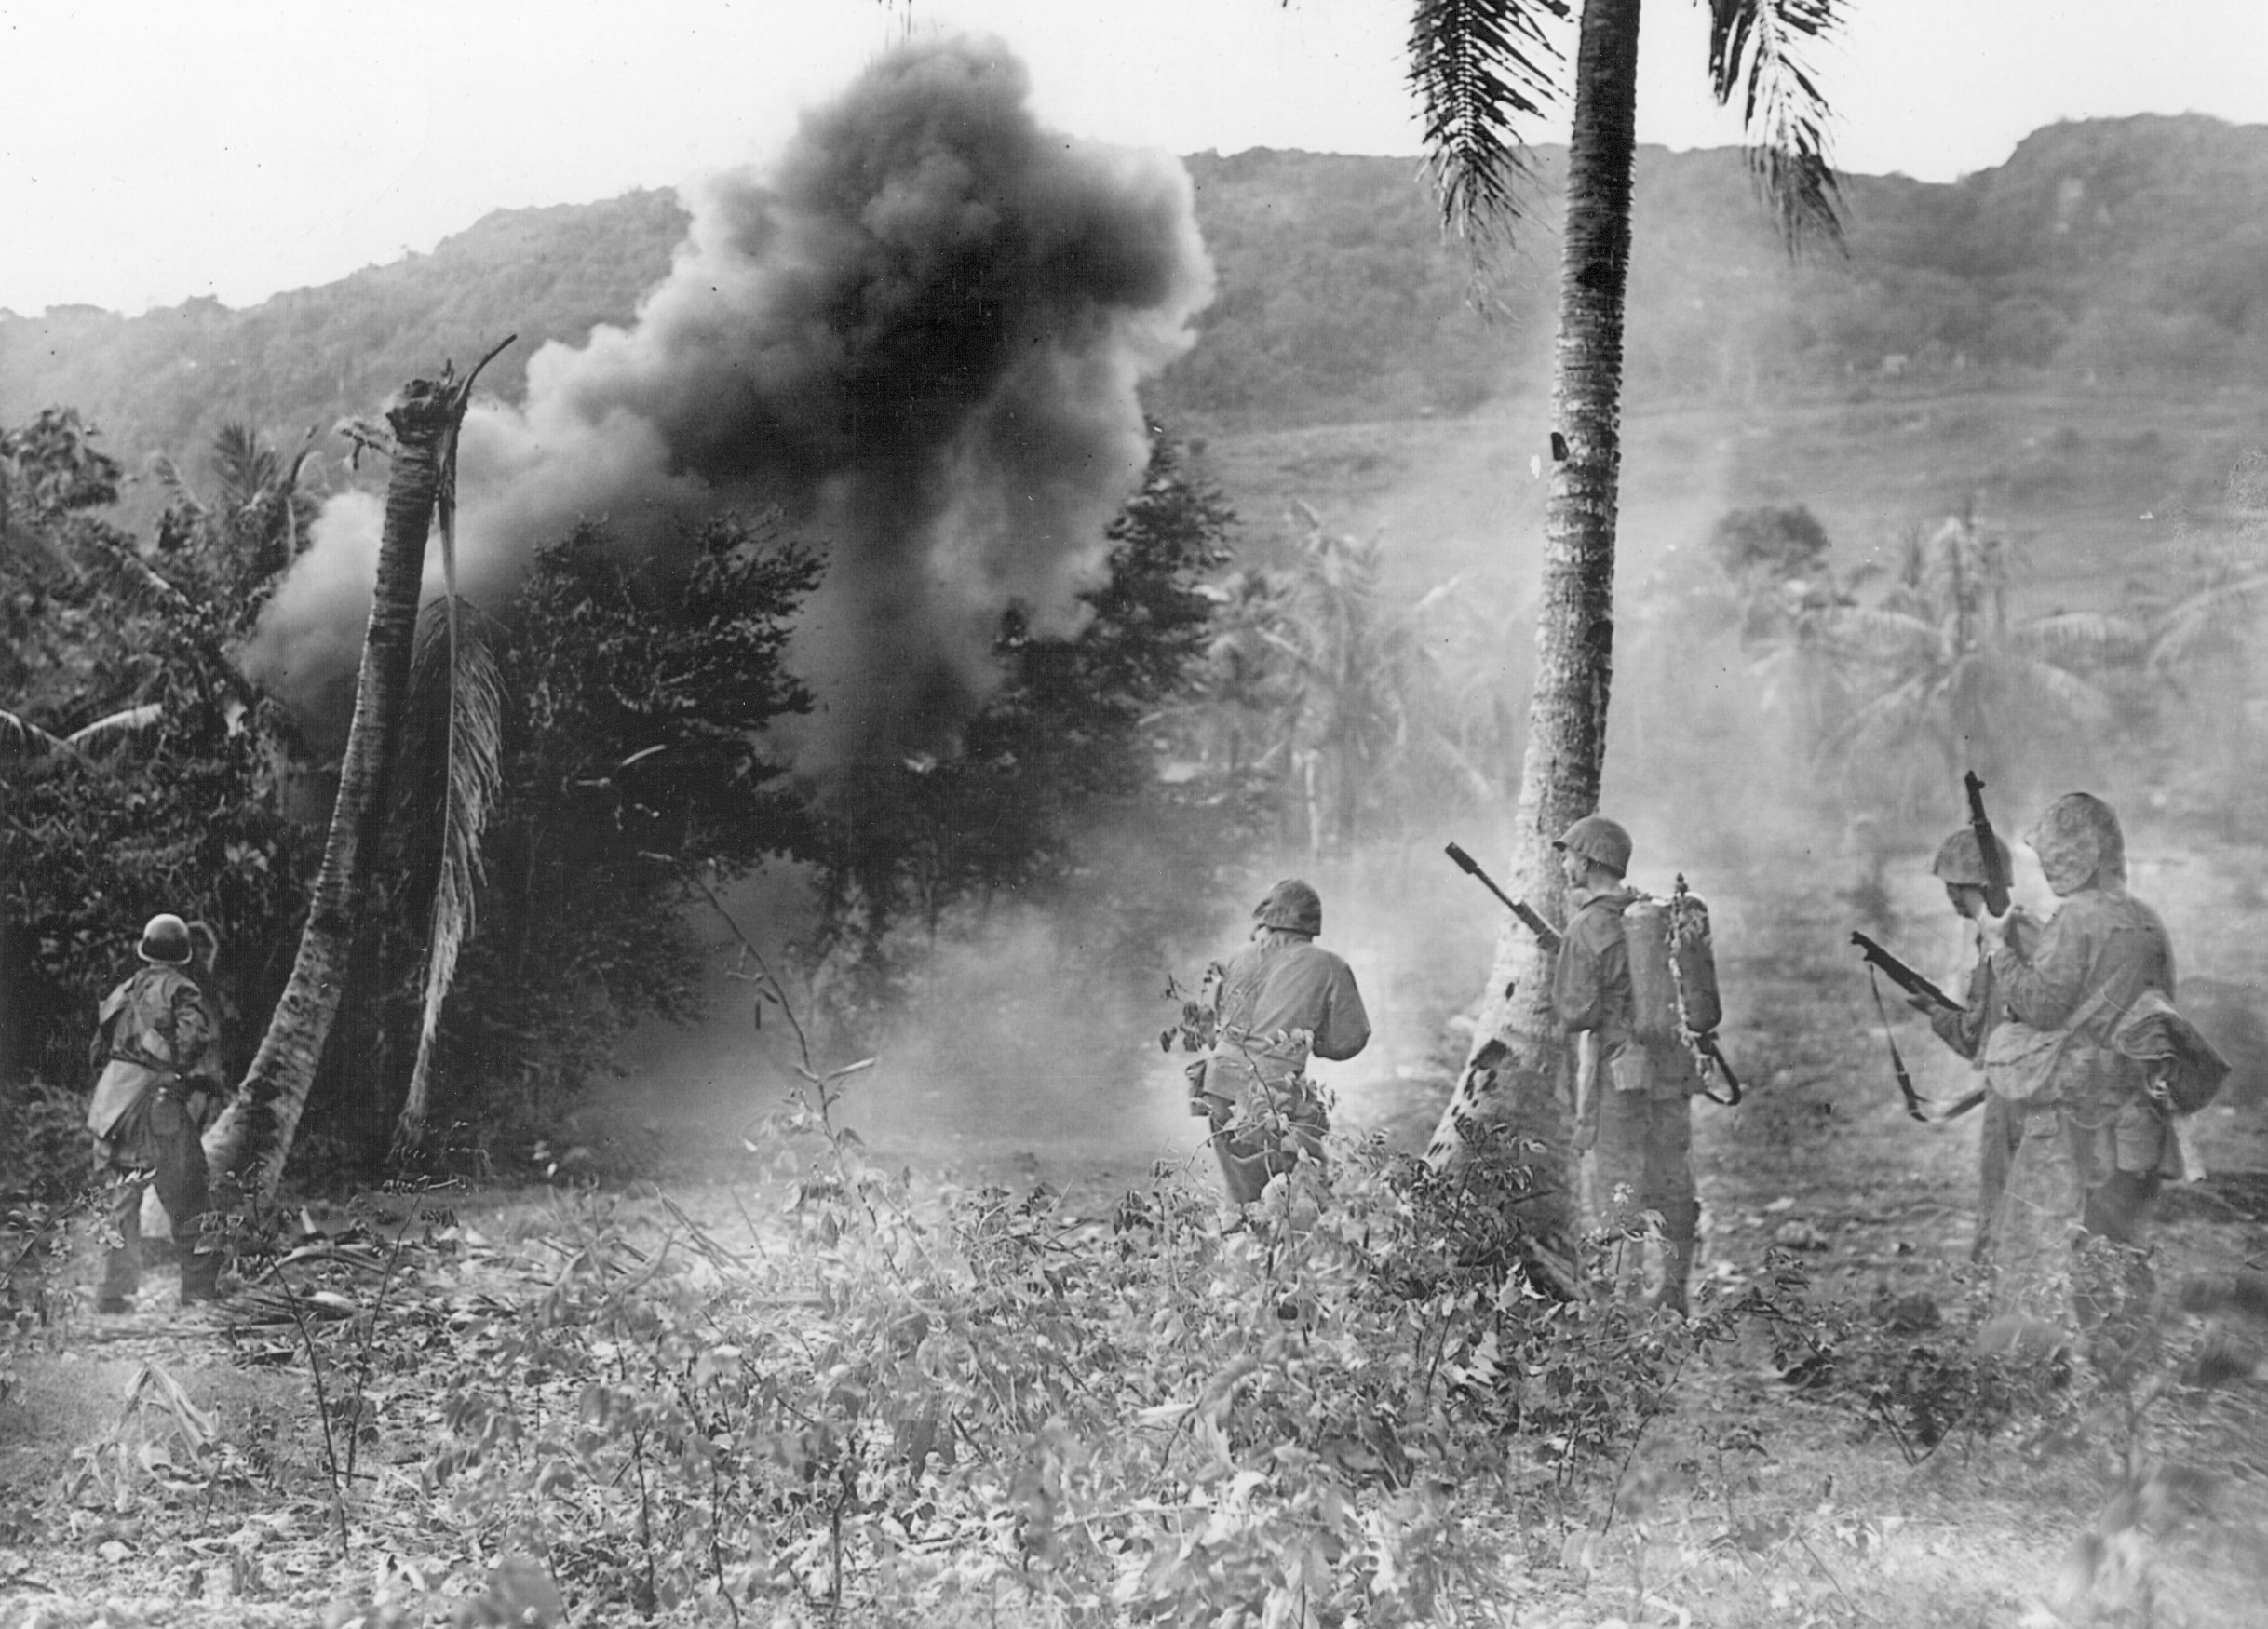 Rooting Japanese defenders out of caves with demolition charges and flamethrowers, American soldiers stand ready to deal with any who emerge.